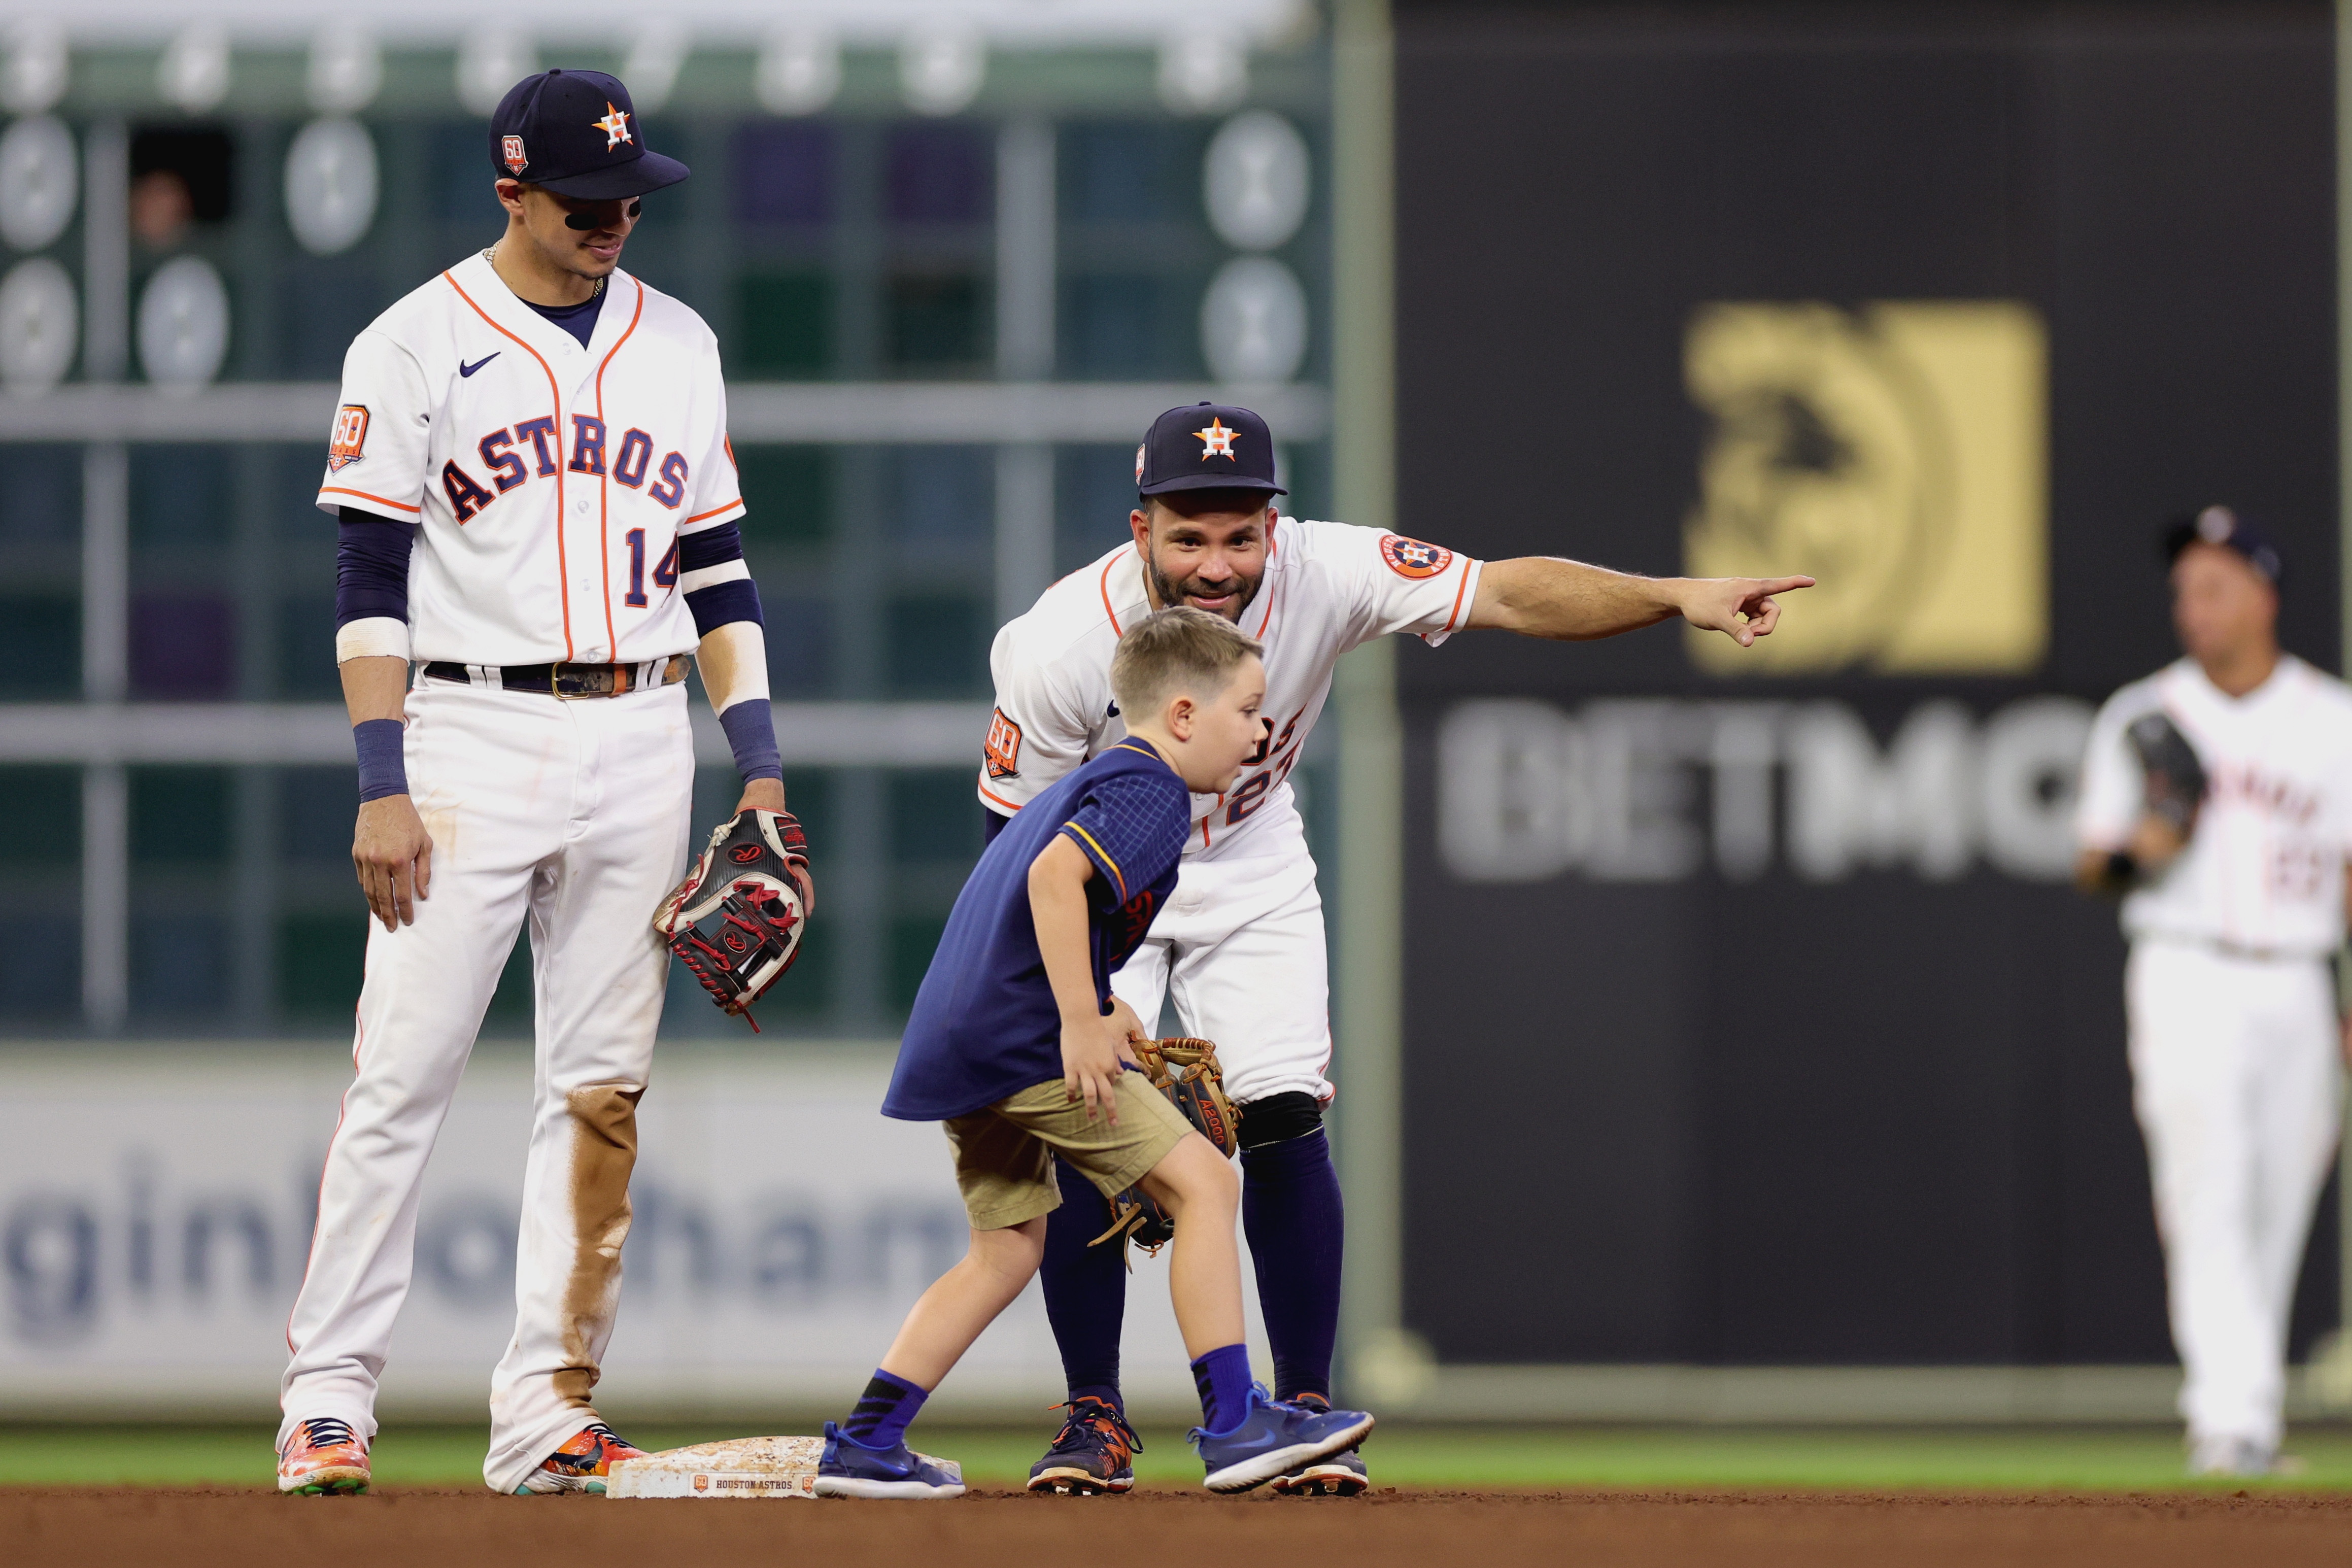 Cutest thing ever': Boy's base-stealing effort at Astros game awarded with  Jose Altuve, Mauricio Dubon help, epic online reactions